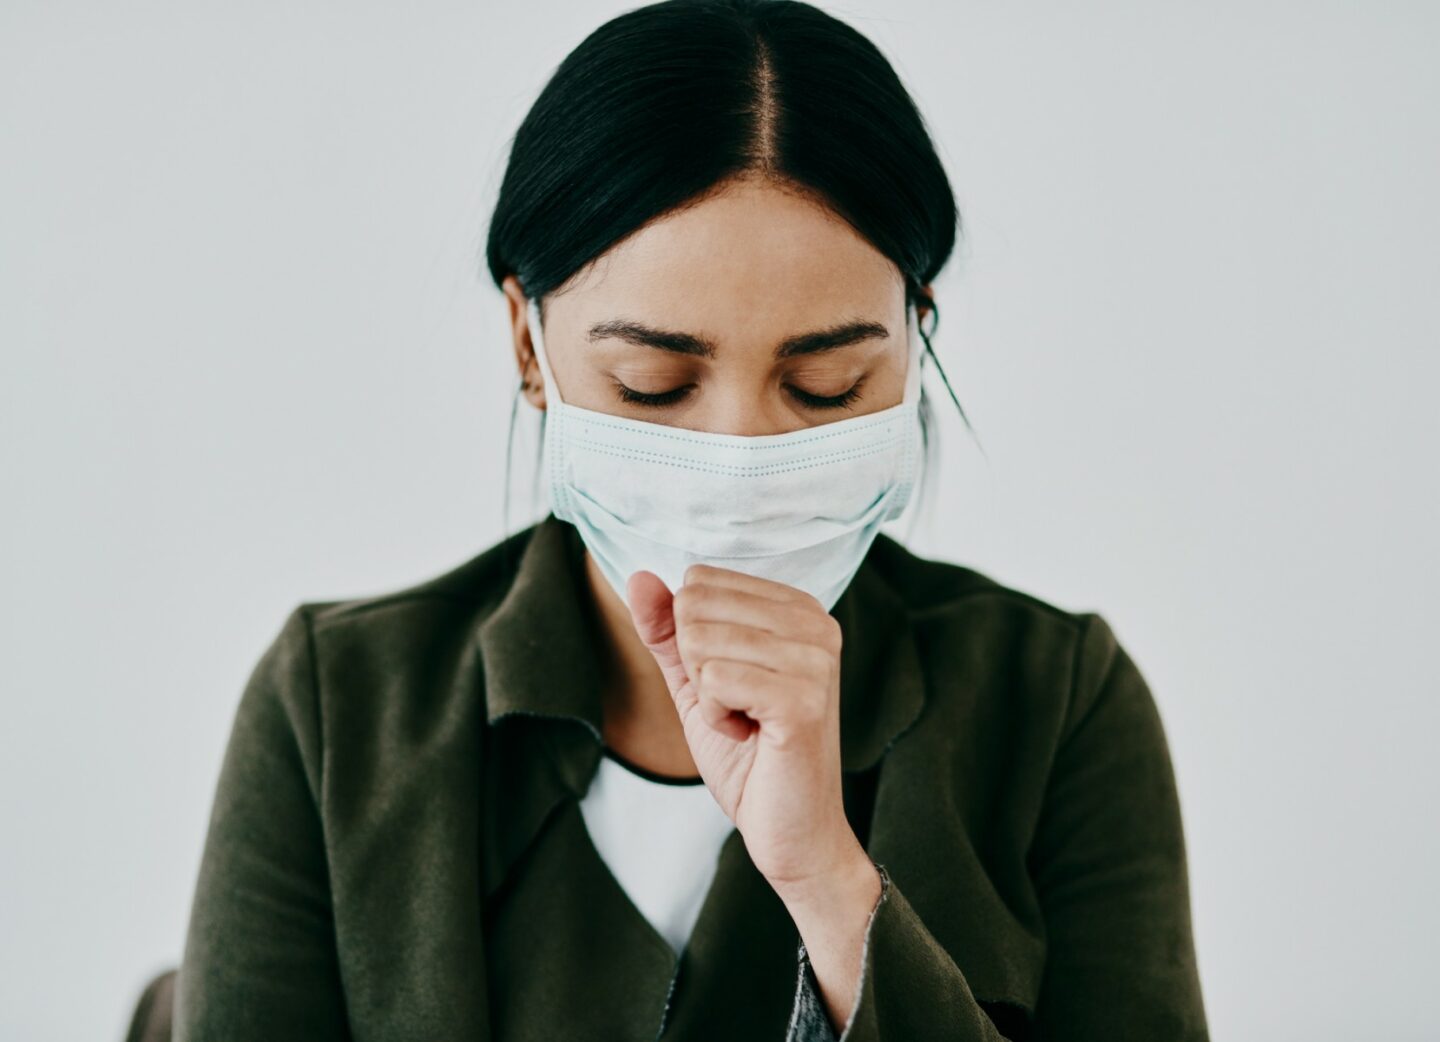 Person coughing wearing mask